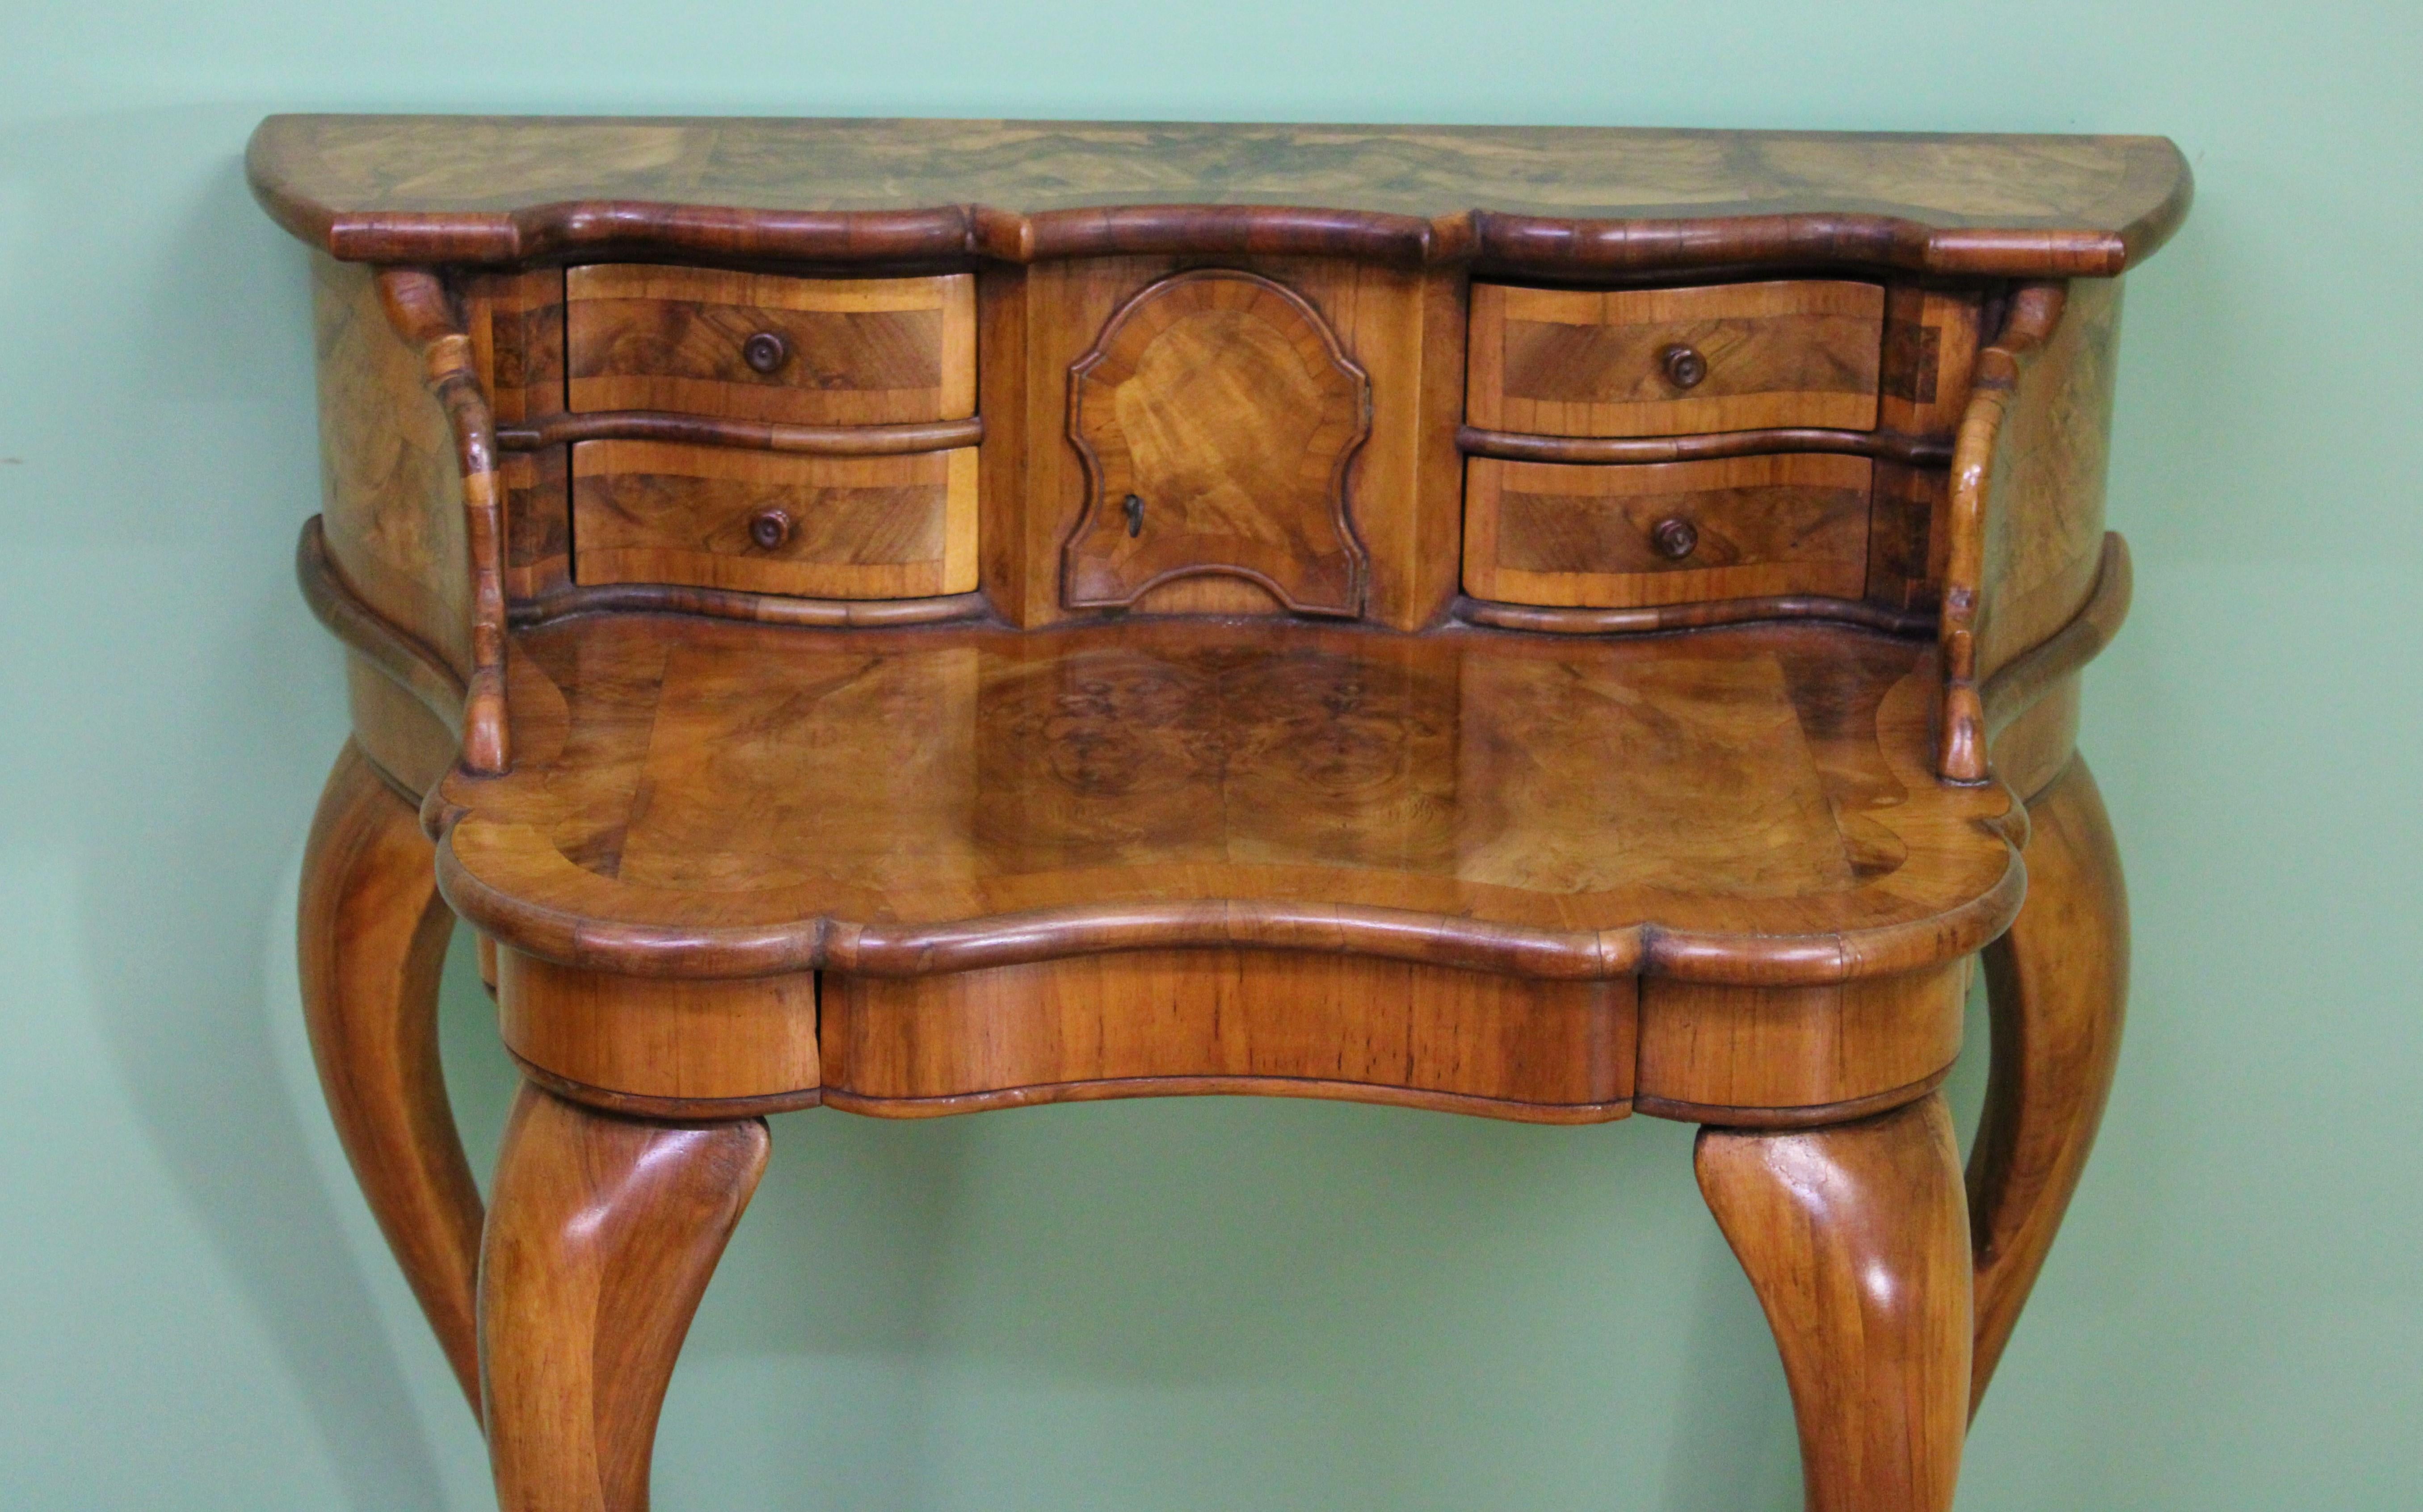 A charming and unusual burr walnut Bonheur du jour. Of very good construction in solid walnut with attractive burr walnut veneers onto an oak carcas. The superstructure with a series of stationary drawers and a central small cupboard (lockable, key